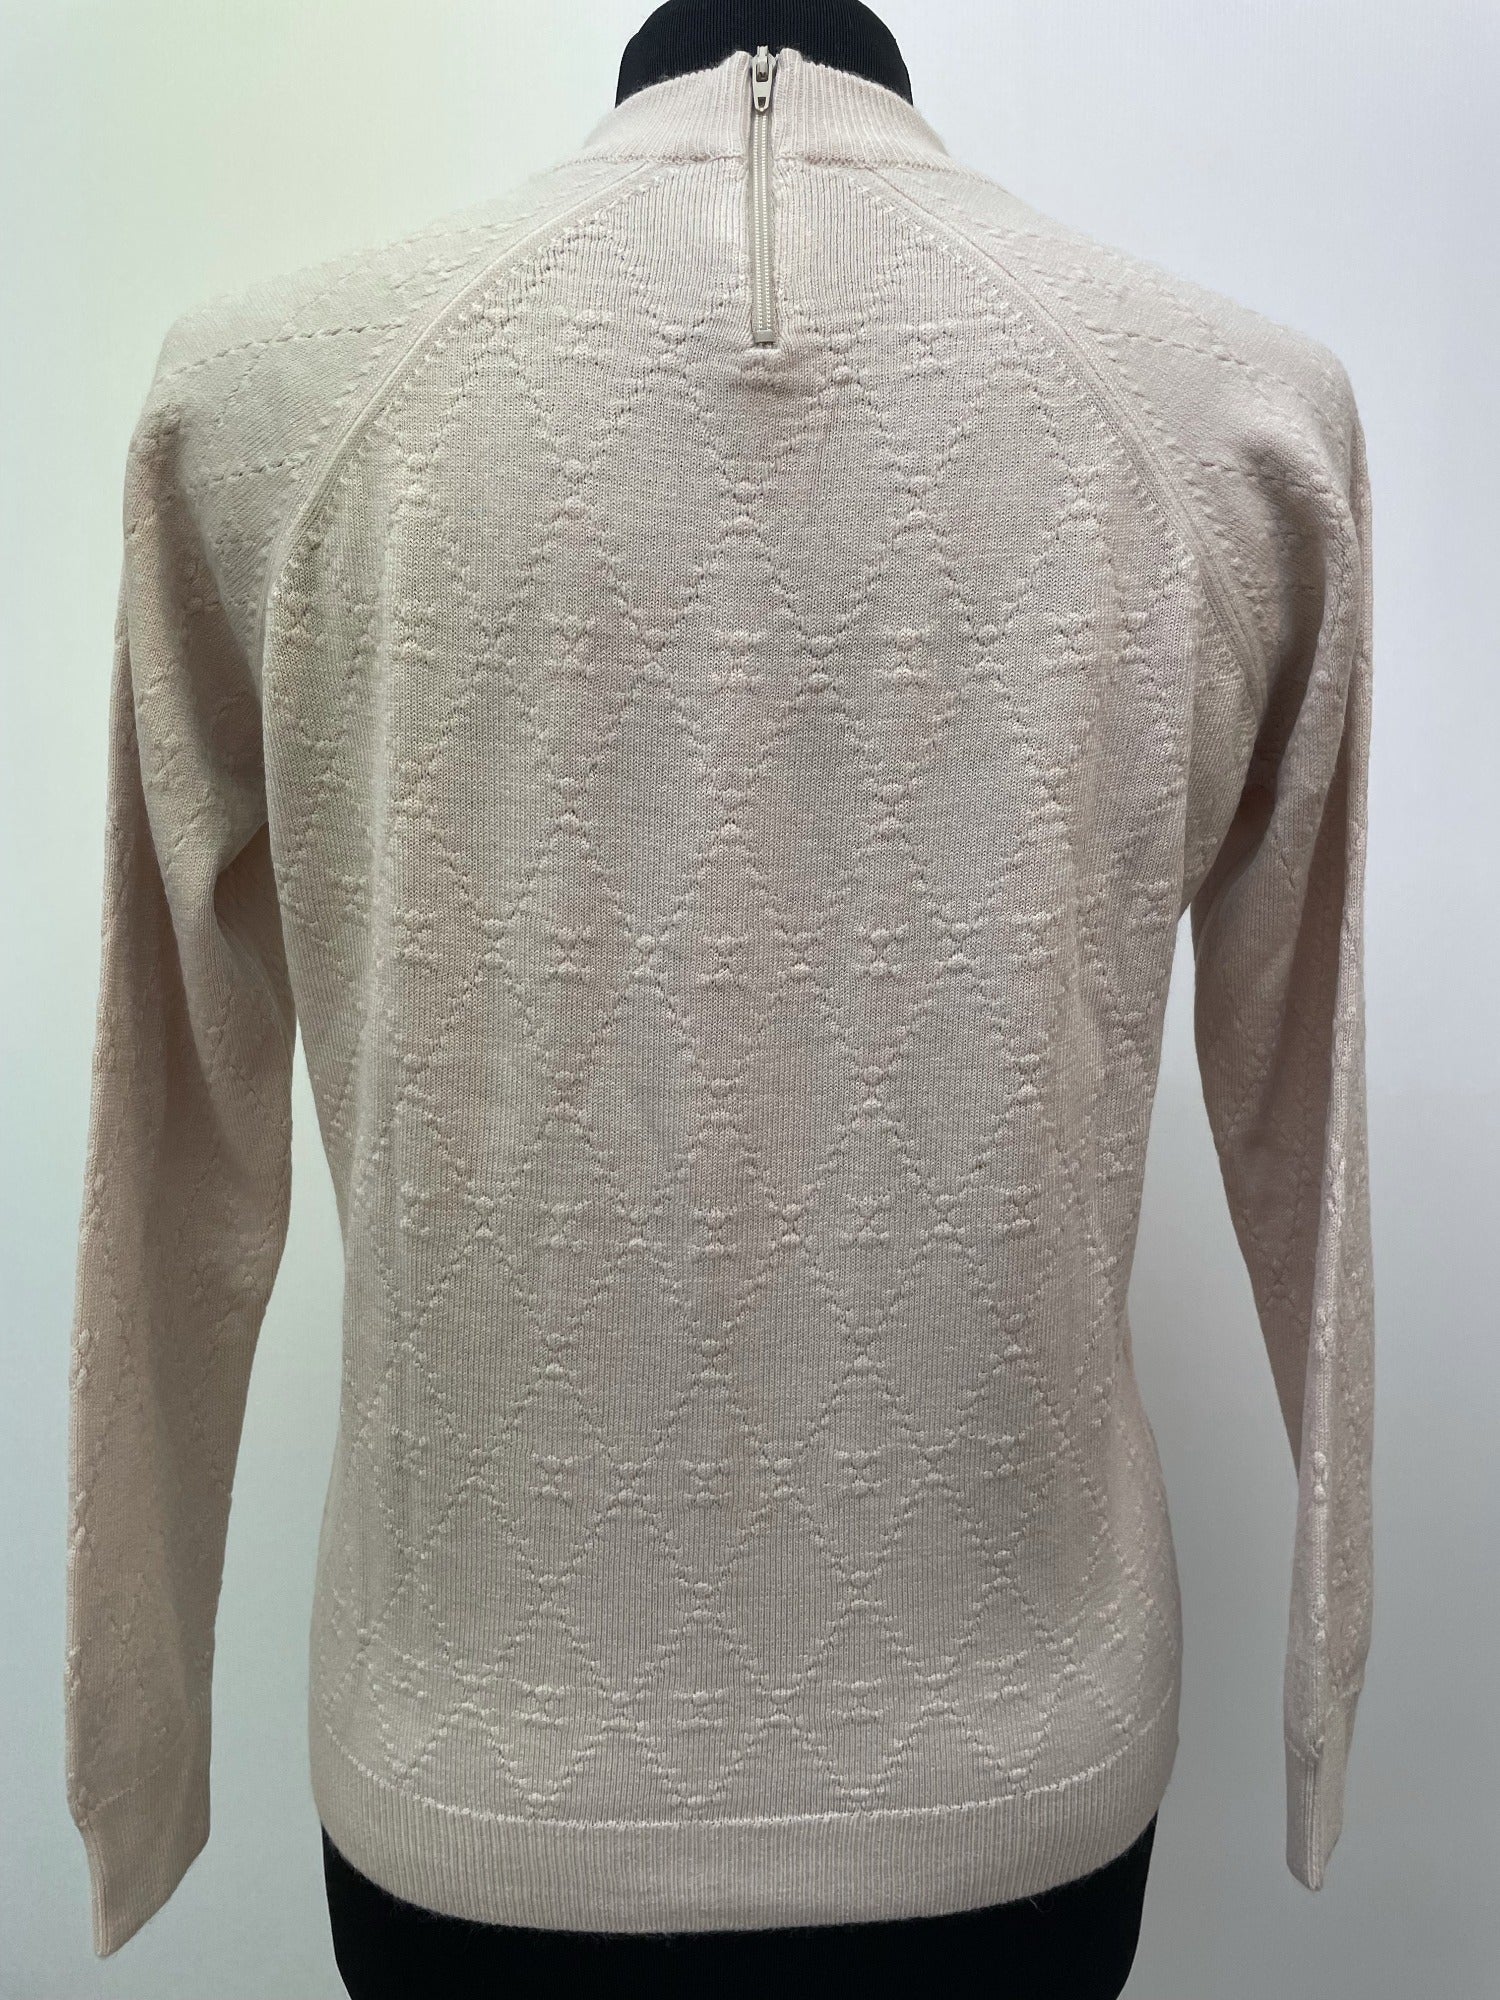 womens  winter  vintage  Urban Village Vintage  urban village  sunbeam  retro  long sleeves  Long sleeved top  long sleeve  knitwear  knitted  knit  jumper  high neck  embroidery detail  Embroidered  elasticated  60s  1960s  12